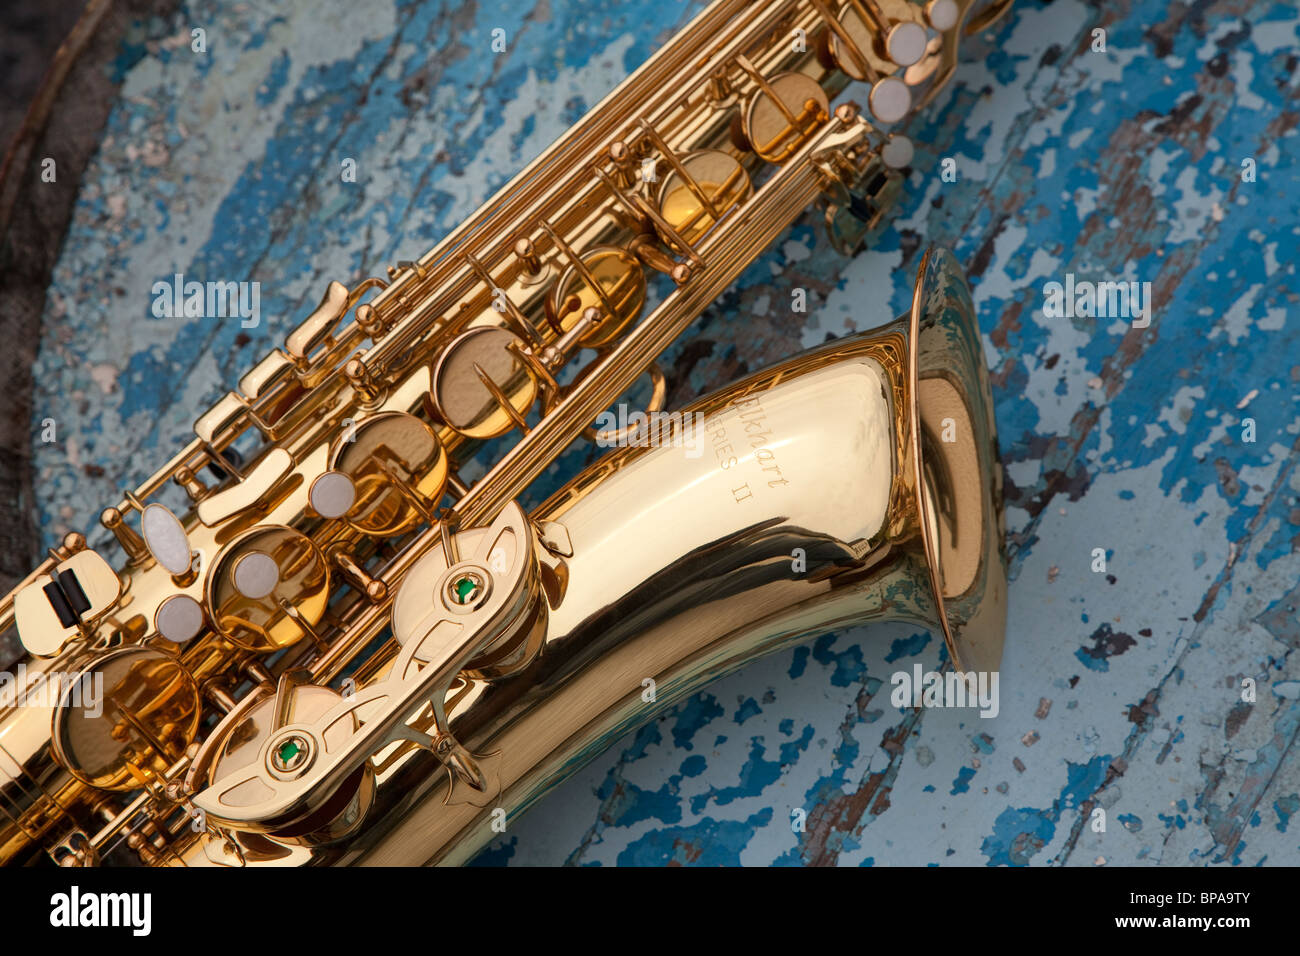 A new saxophone contrast against the flaking blue paint of a whisky cask. Stock Photo